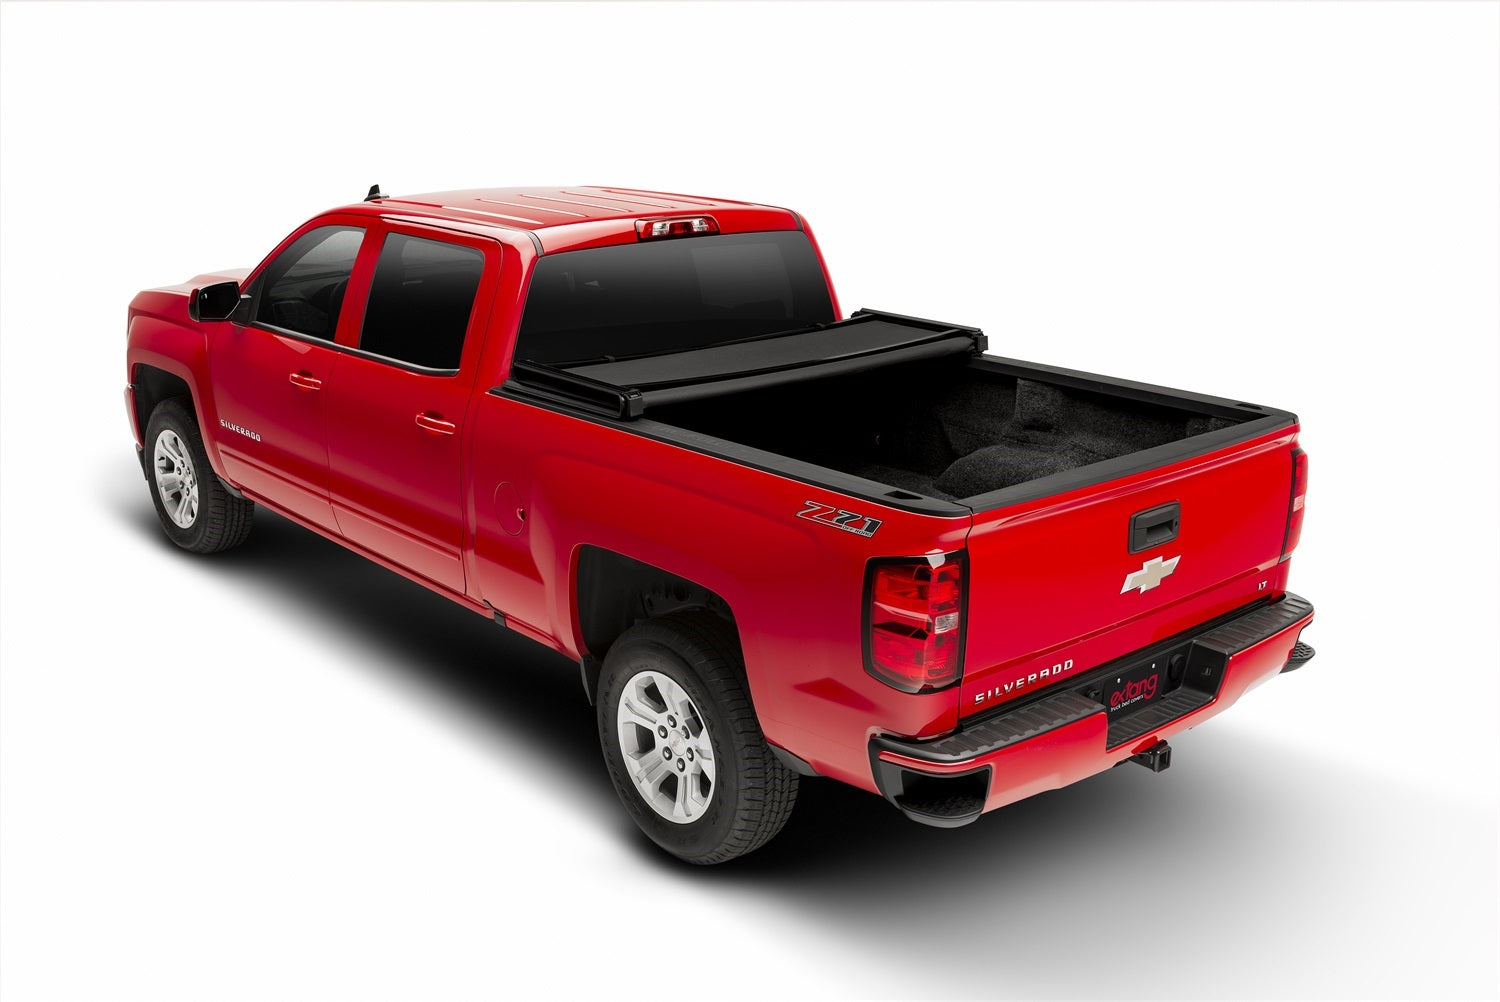 Extang 92560 Trifecta 2.0 Tonneau Cover Fits 94-03 Hombre S10 Pickup Sonoma